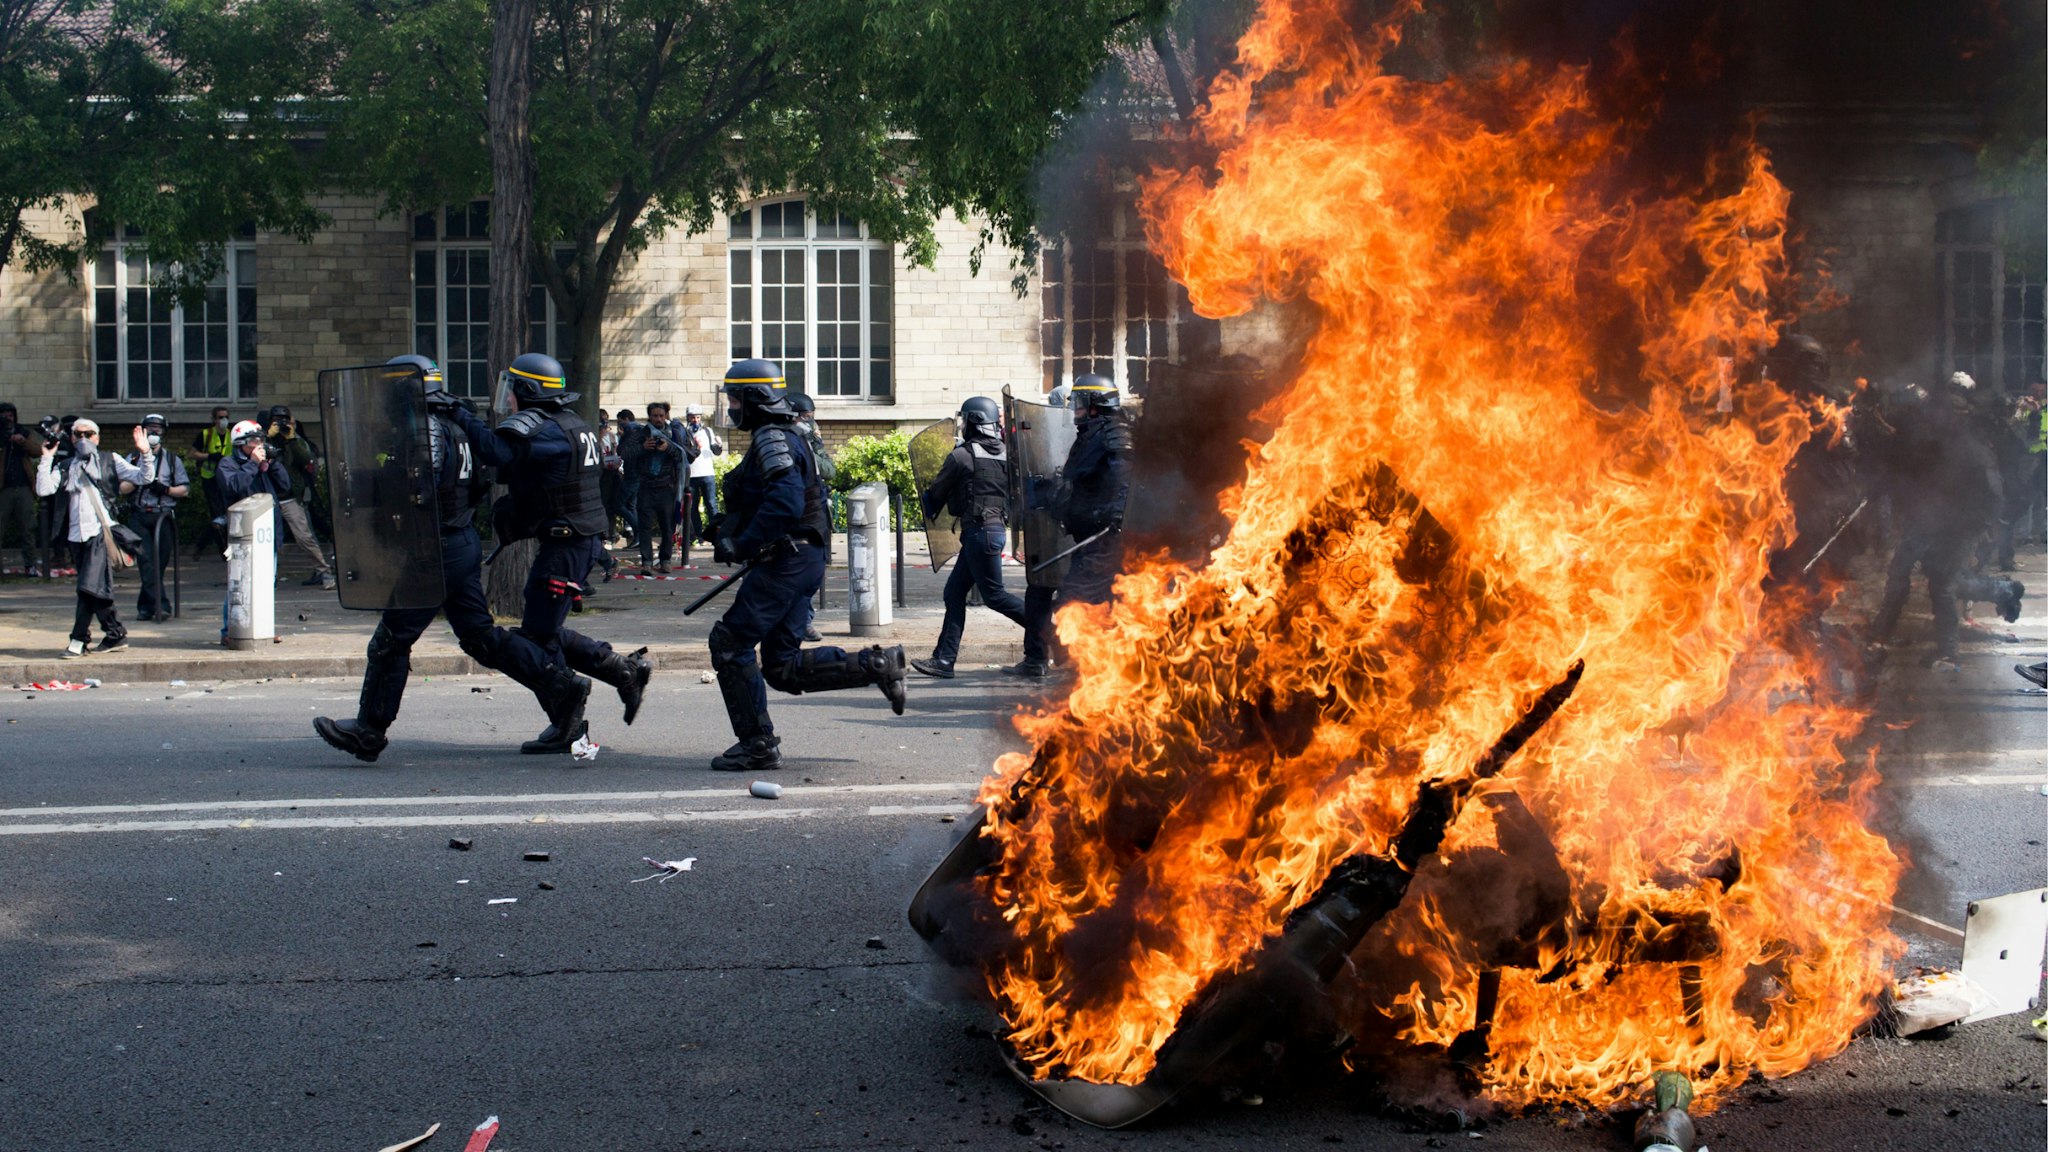 Police forces are charging demonstrators during the inter-union demonstration on May 1 in Paris, which also includes yellow vests, in Paris, France, on May 1, 2019.